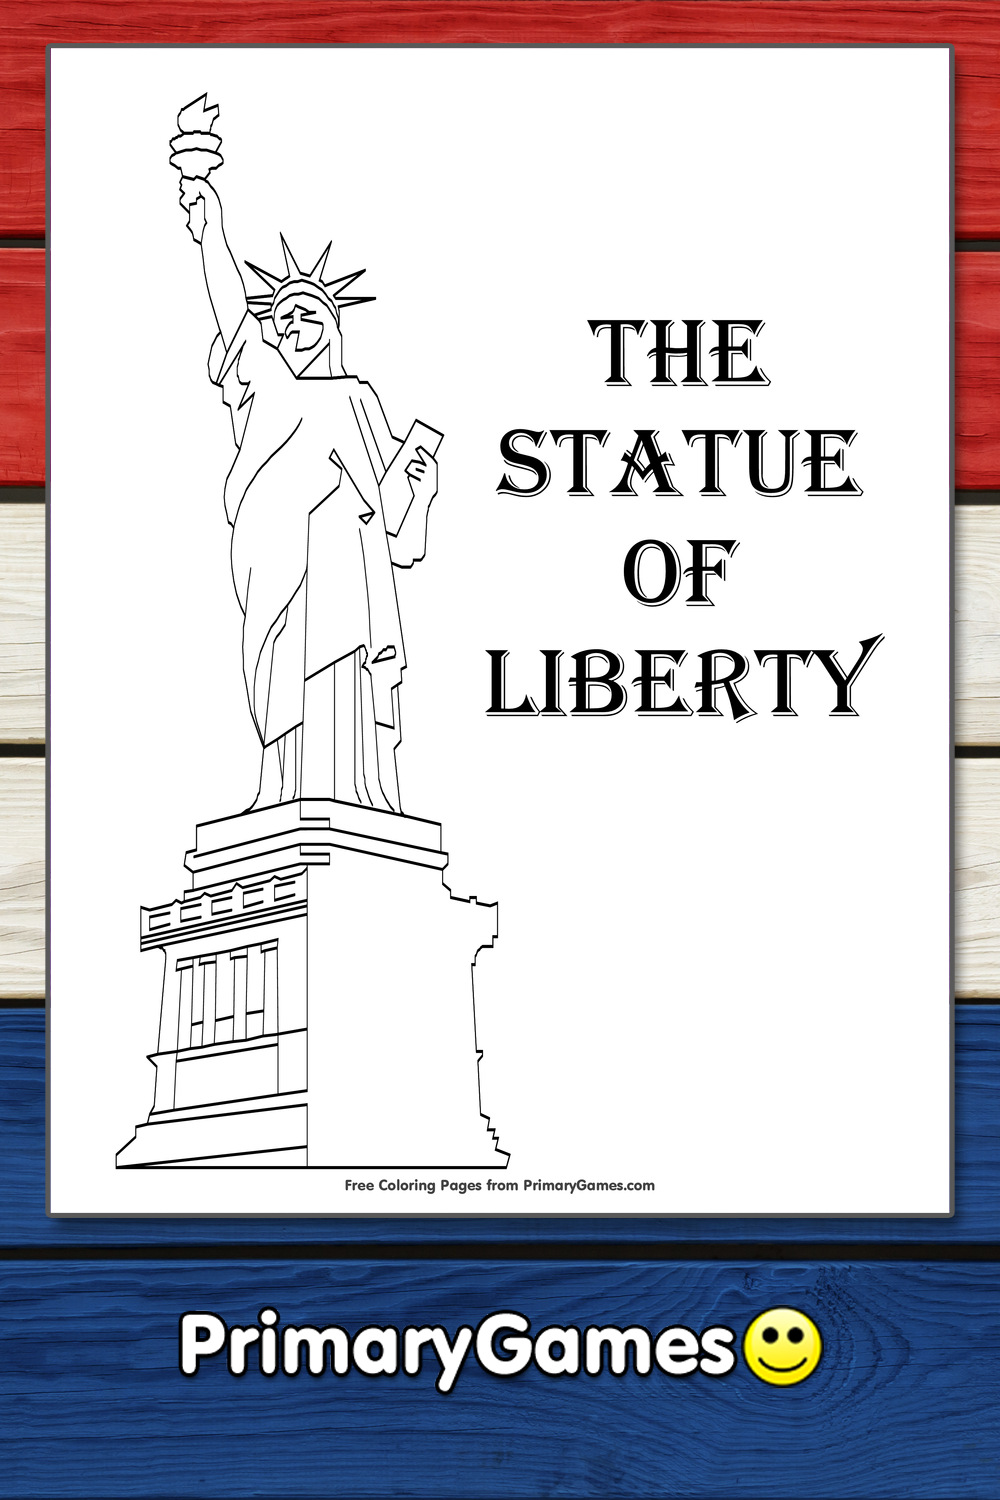 The statue of liberty coloring page â free printable pdf from